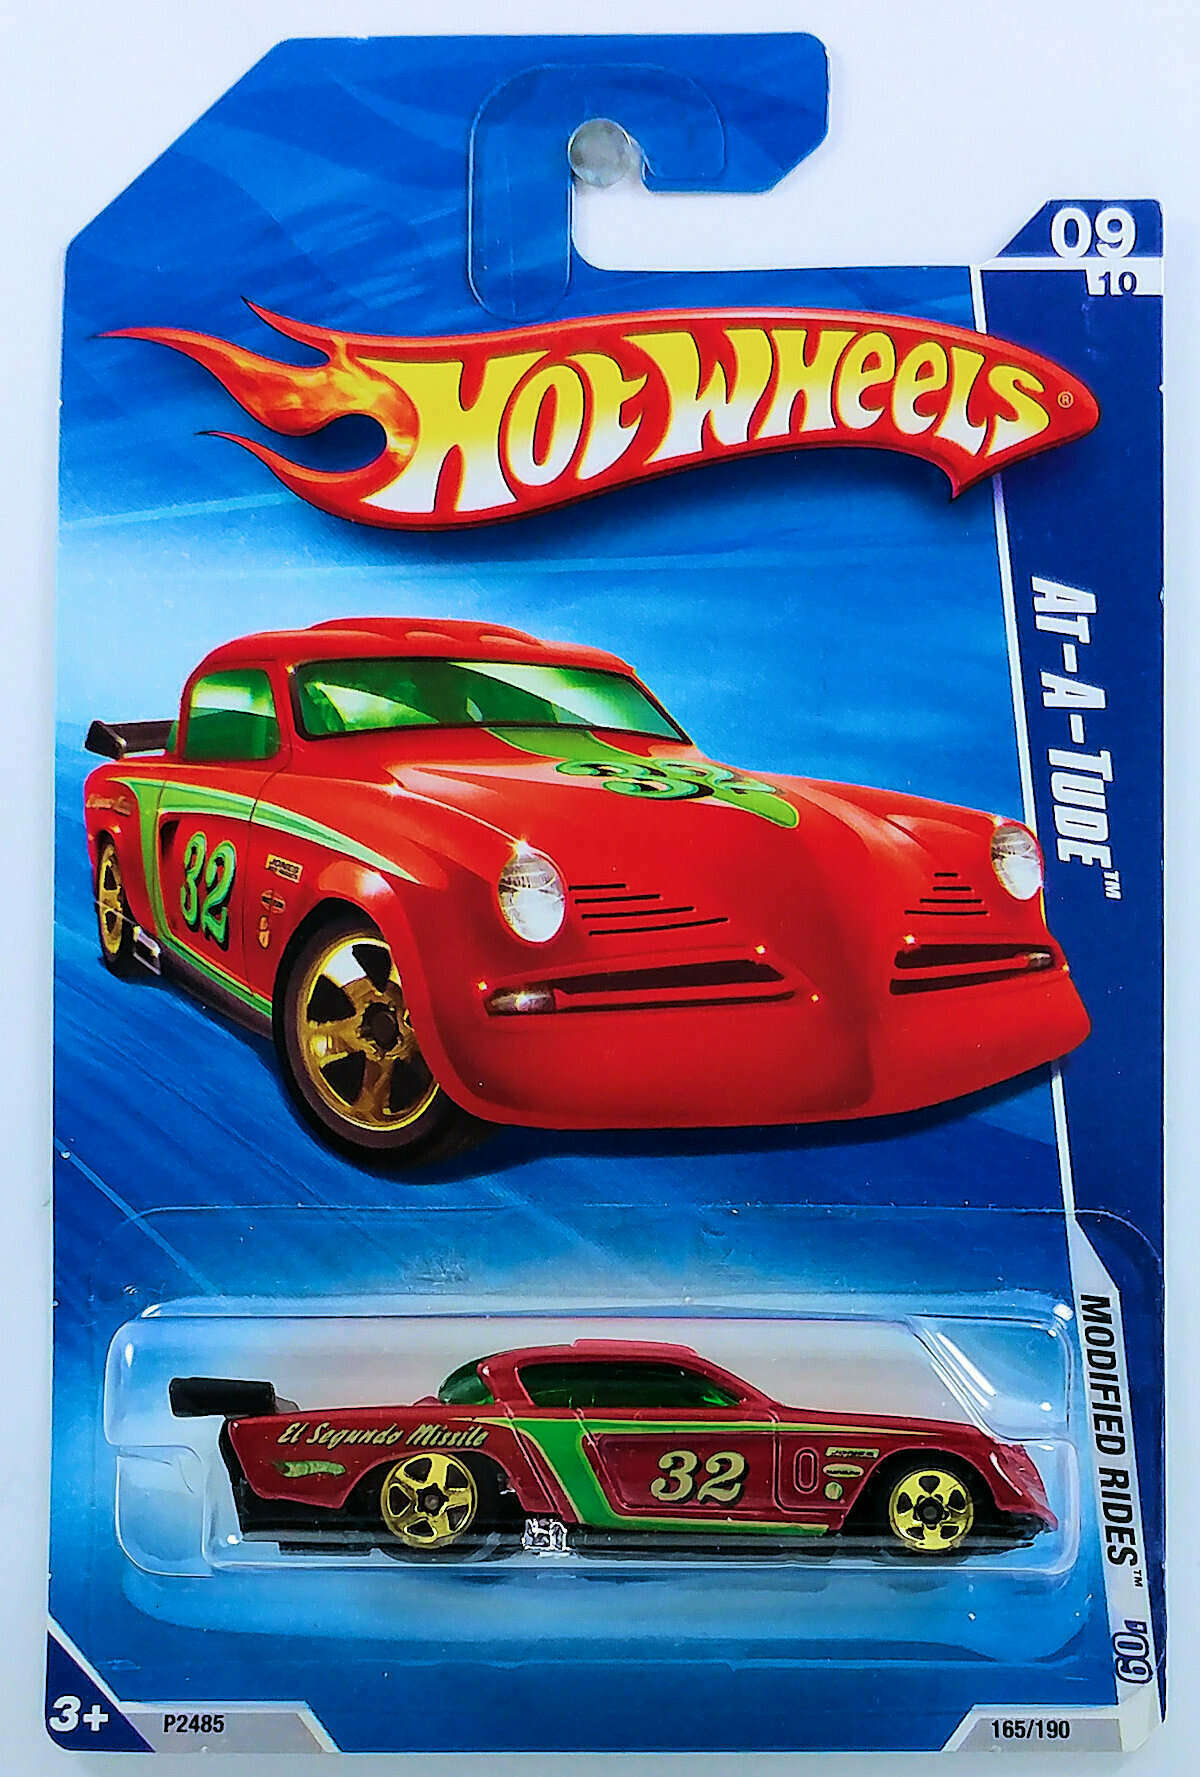 2009 Hot Wheels At-A-Tude Red | The Toy Peddler